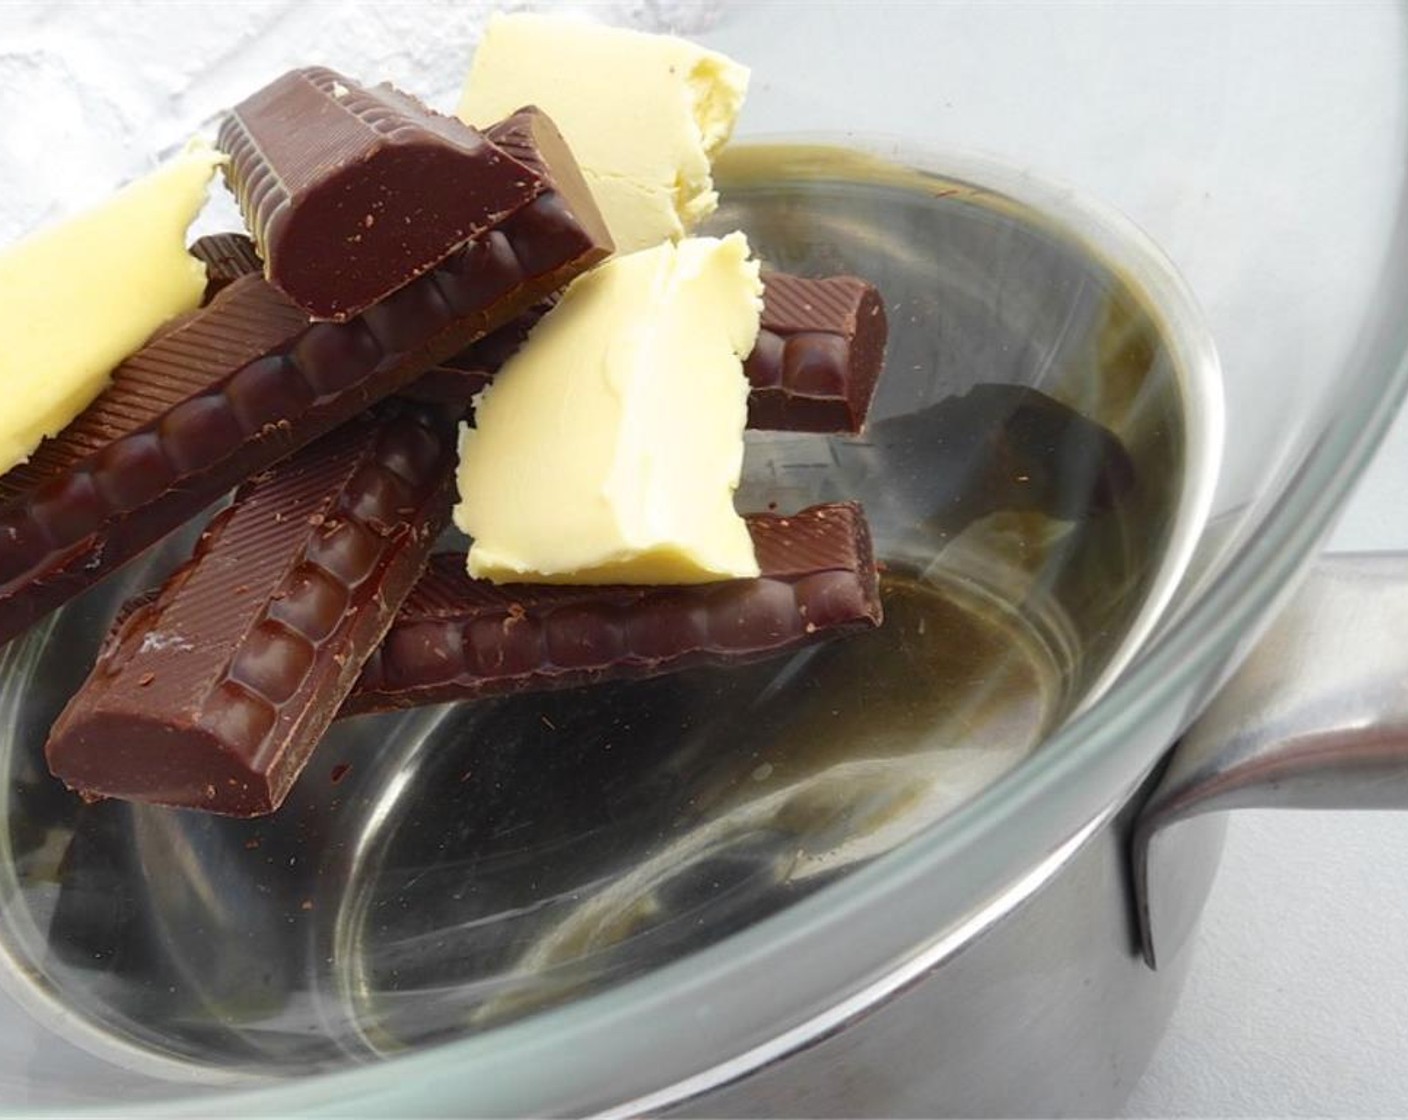 step 2 Bring a small pan of water to a boil over medium heat. Put a larger glass bowl on top. Break up the Dark Chocolate (1 cup) into smaller pieces. Chop up the Butter (1 cup). Add both chocolate and butter to the glass bowl and let them melt over the boiling water.